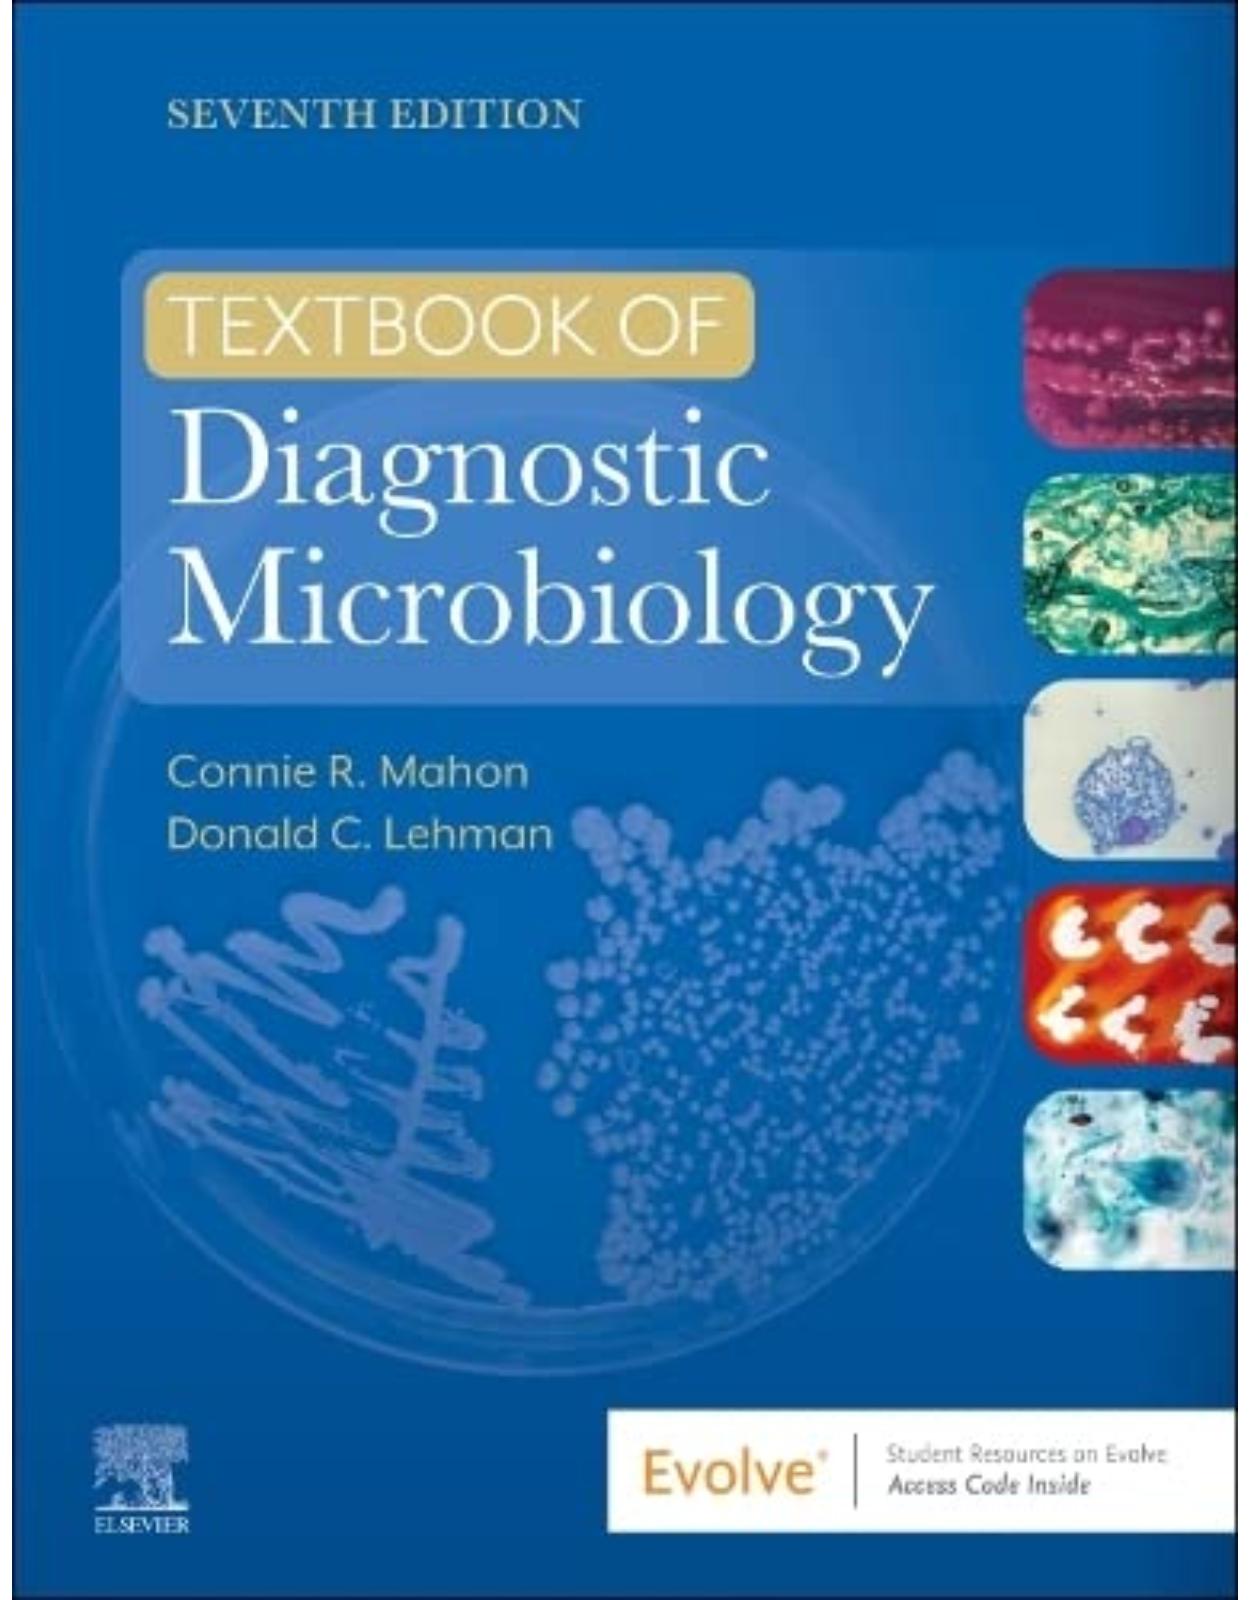 Textbook of Diagnostic Microbiology 